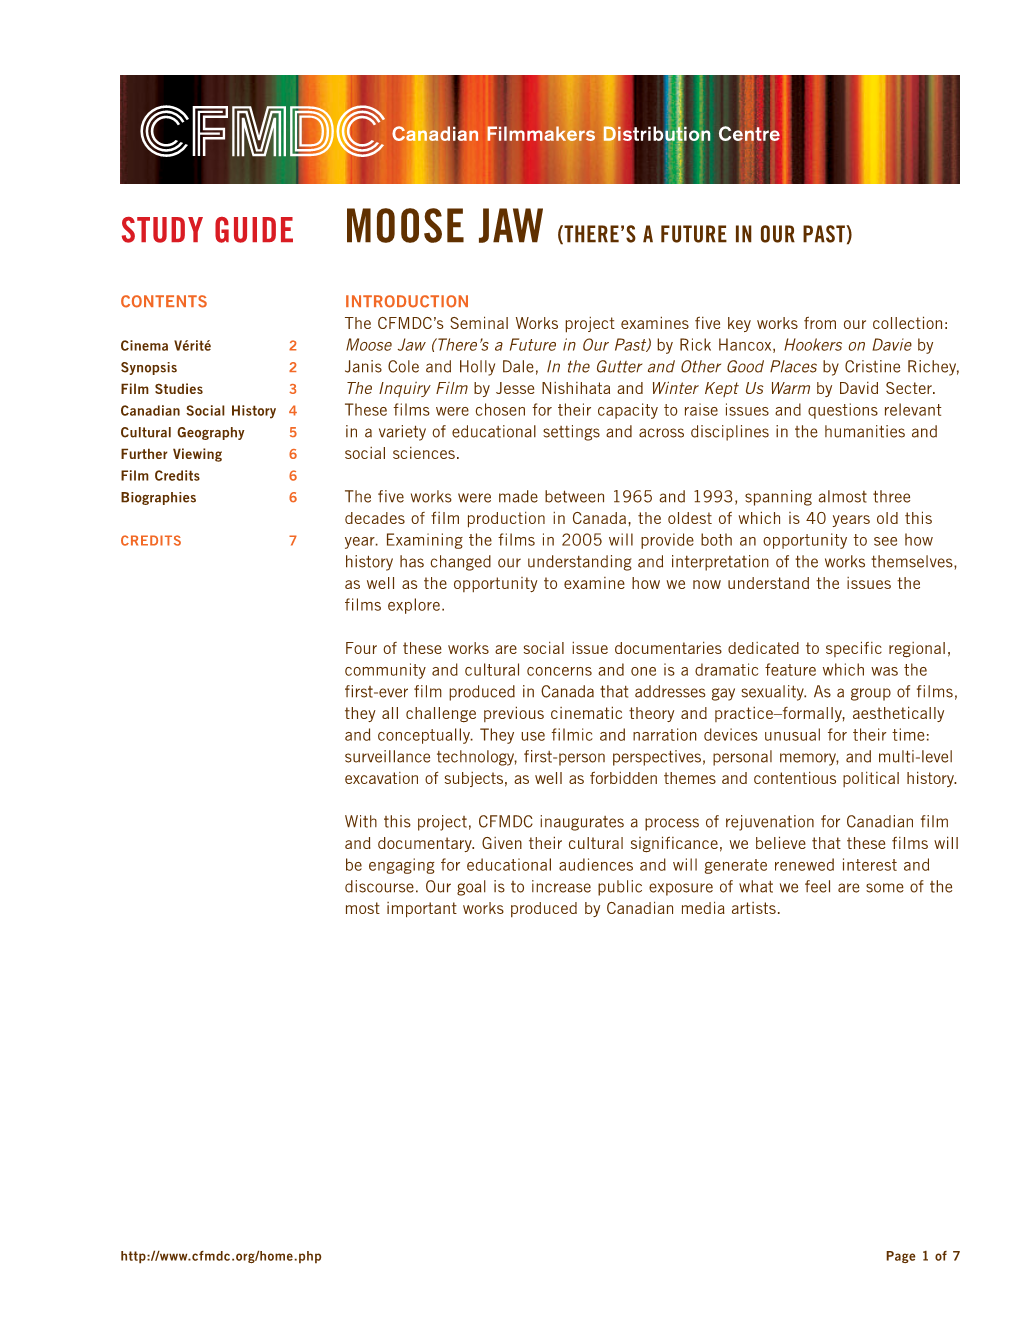 Study Guide Moose Jaw (There’S a Future in Our Past)